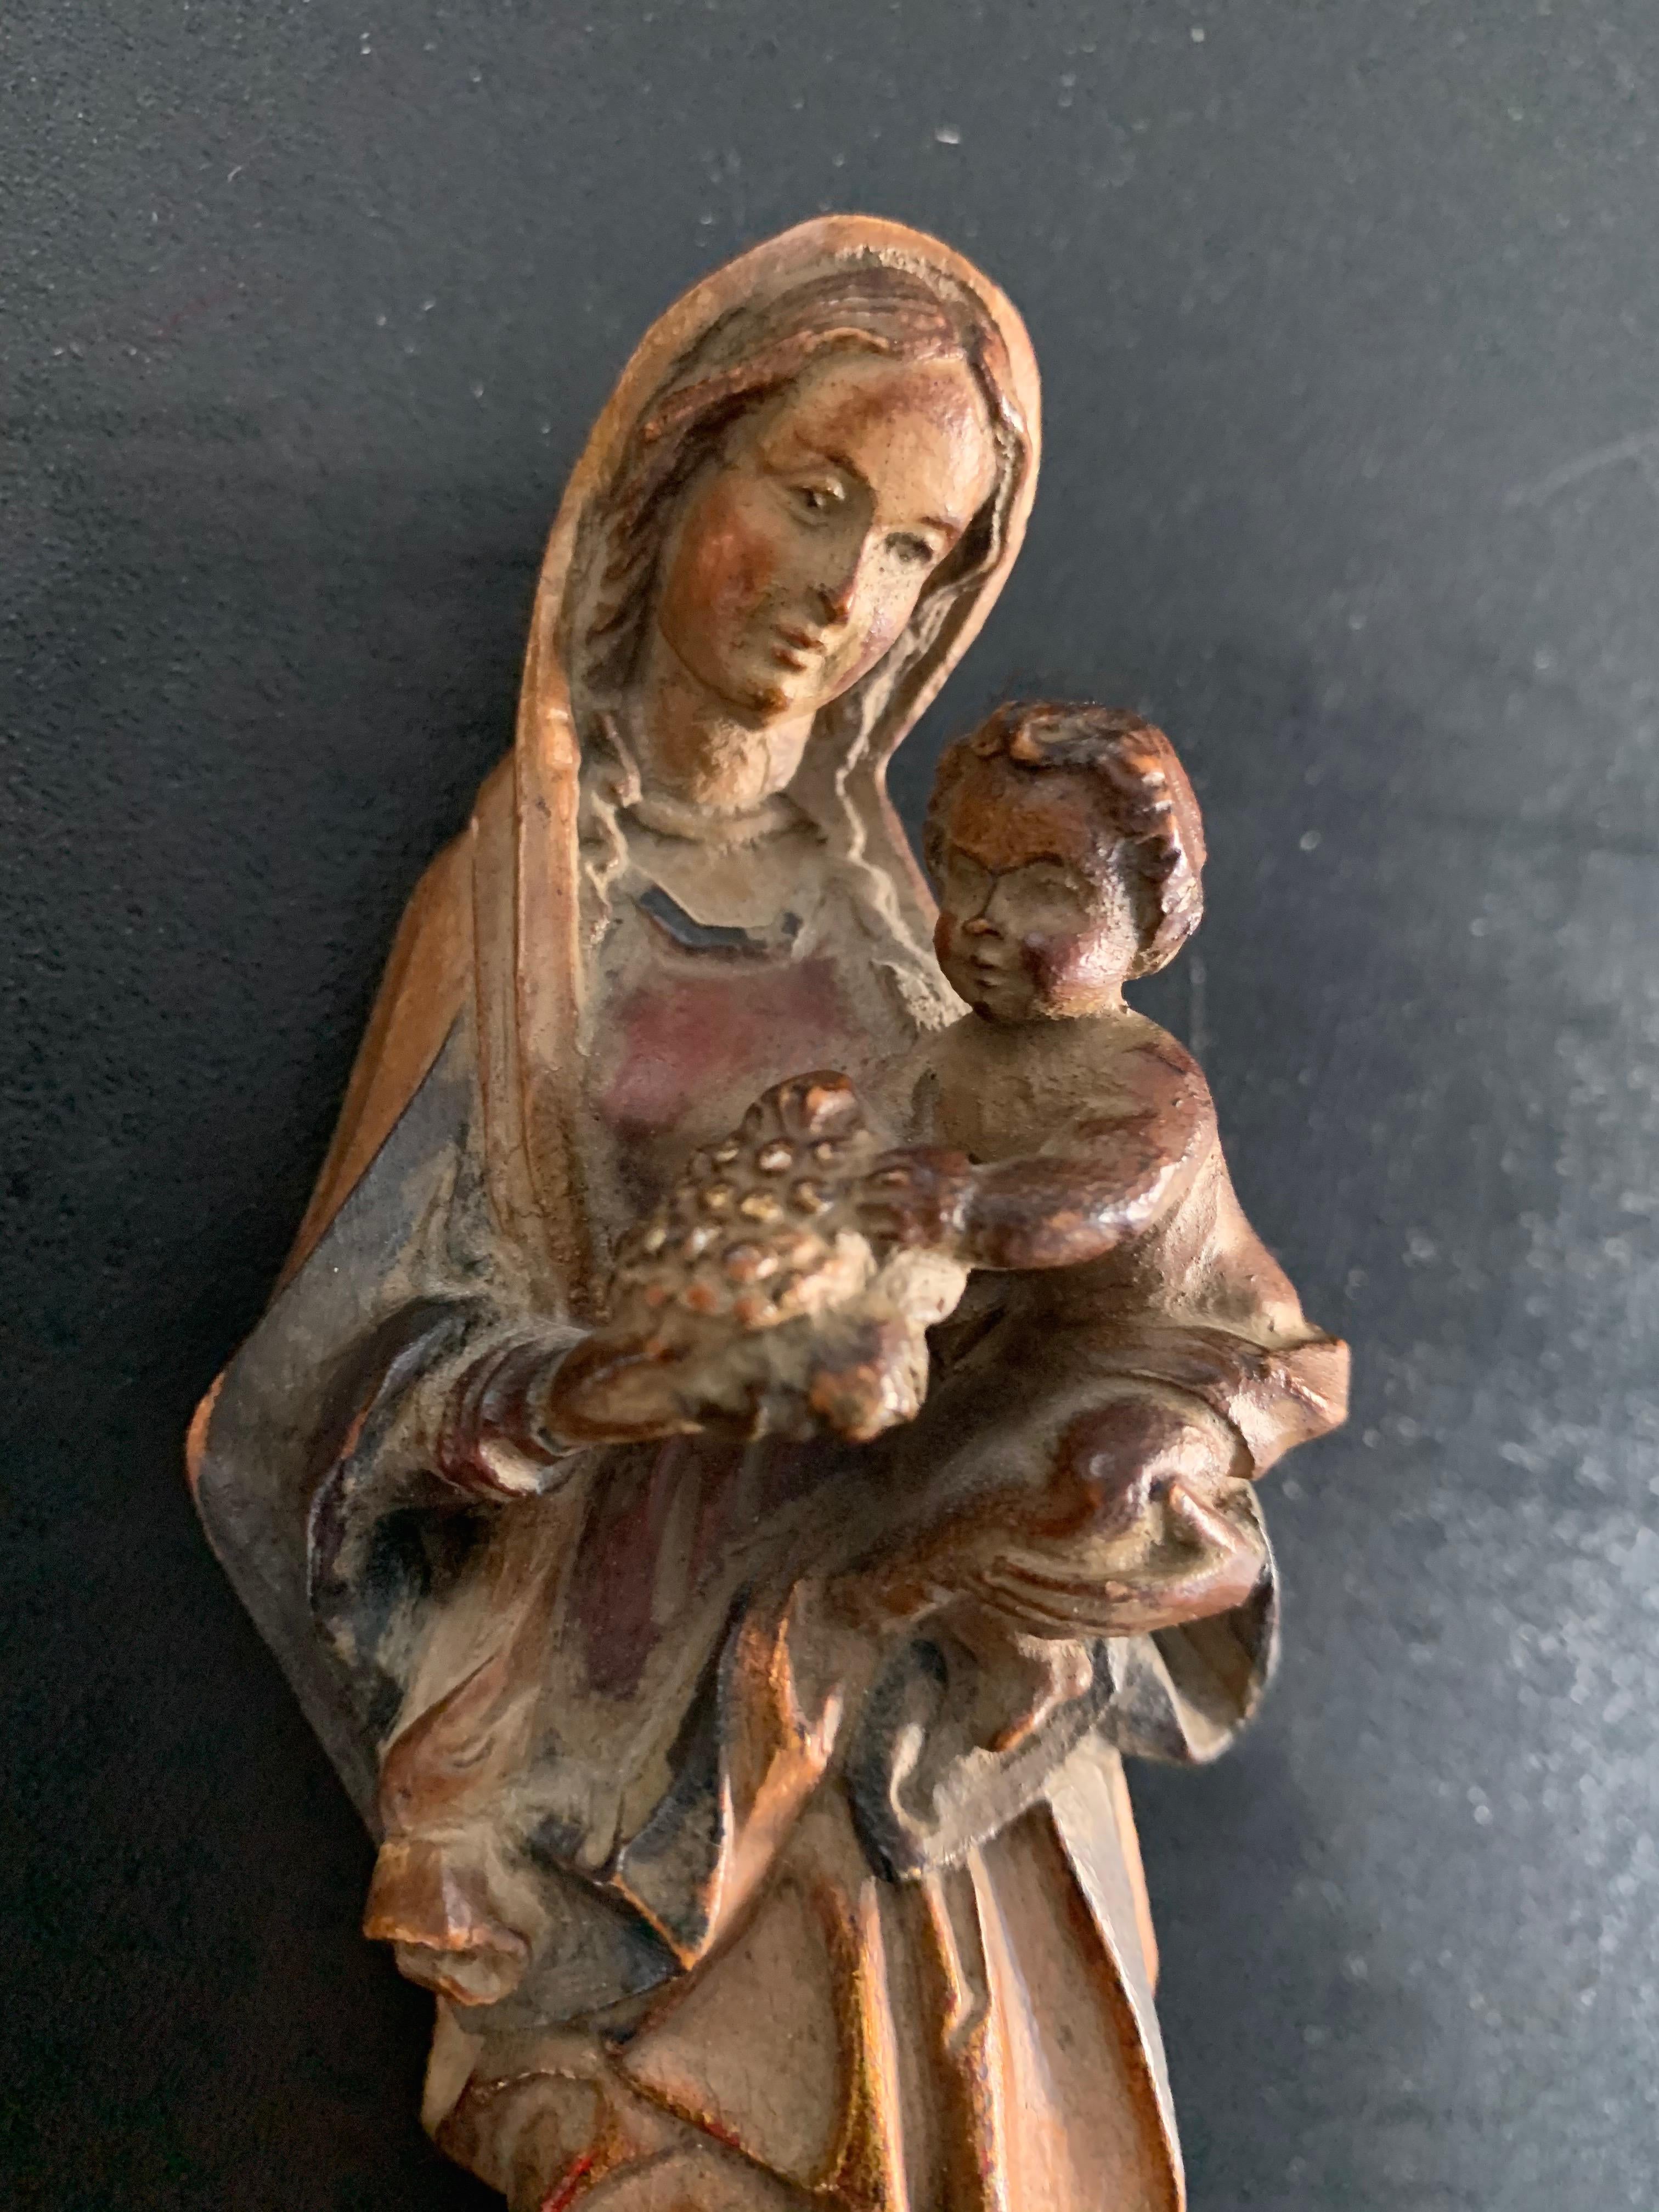 Hand-Crafted Carved Miniature Statue of Mother Mary & Child Jesus on Gilt Wooden Wall Bracket